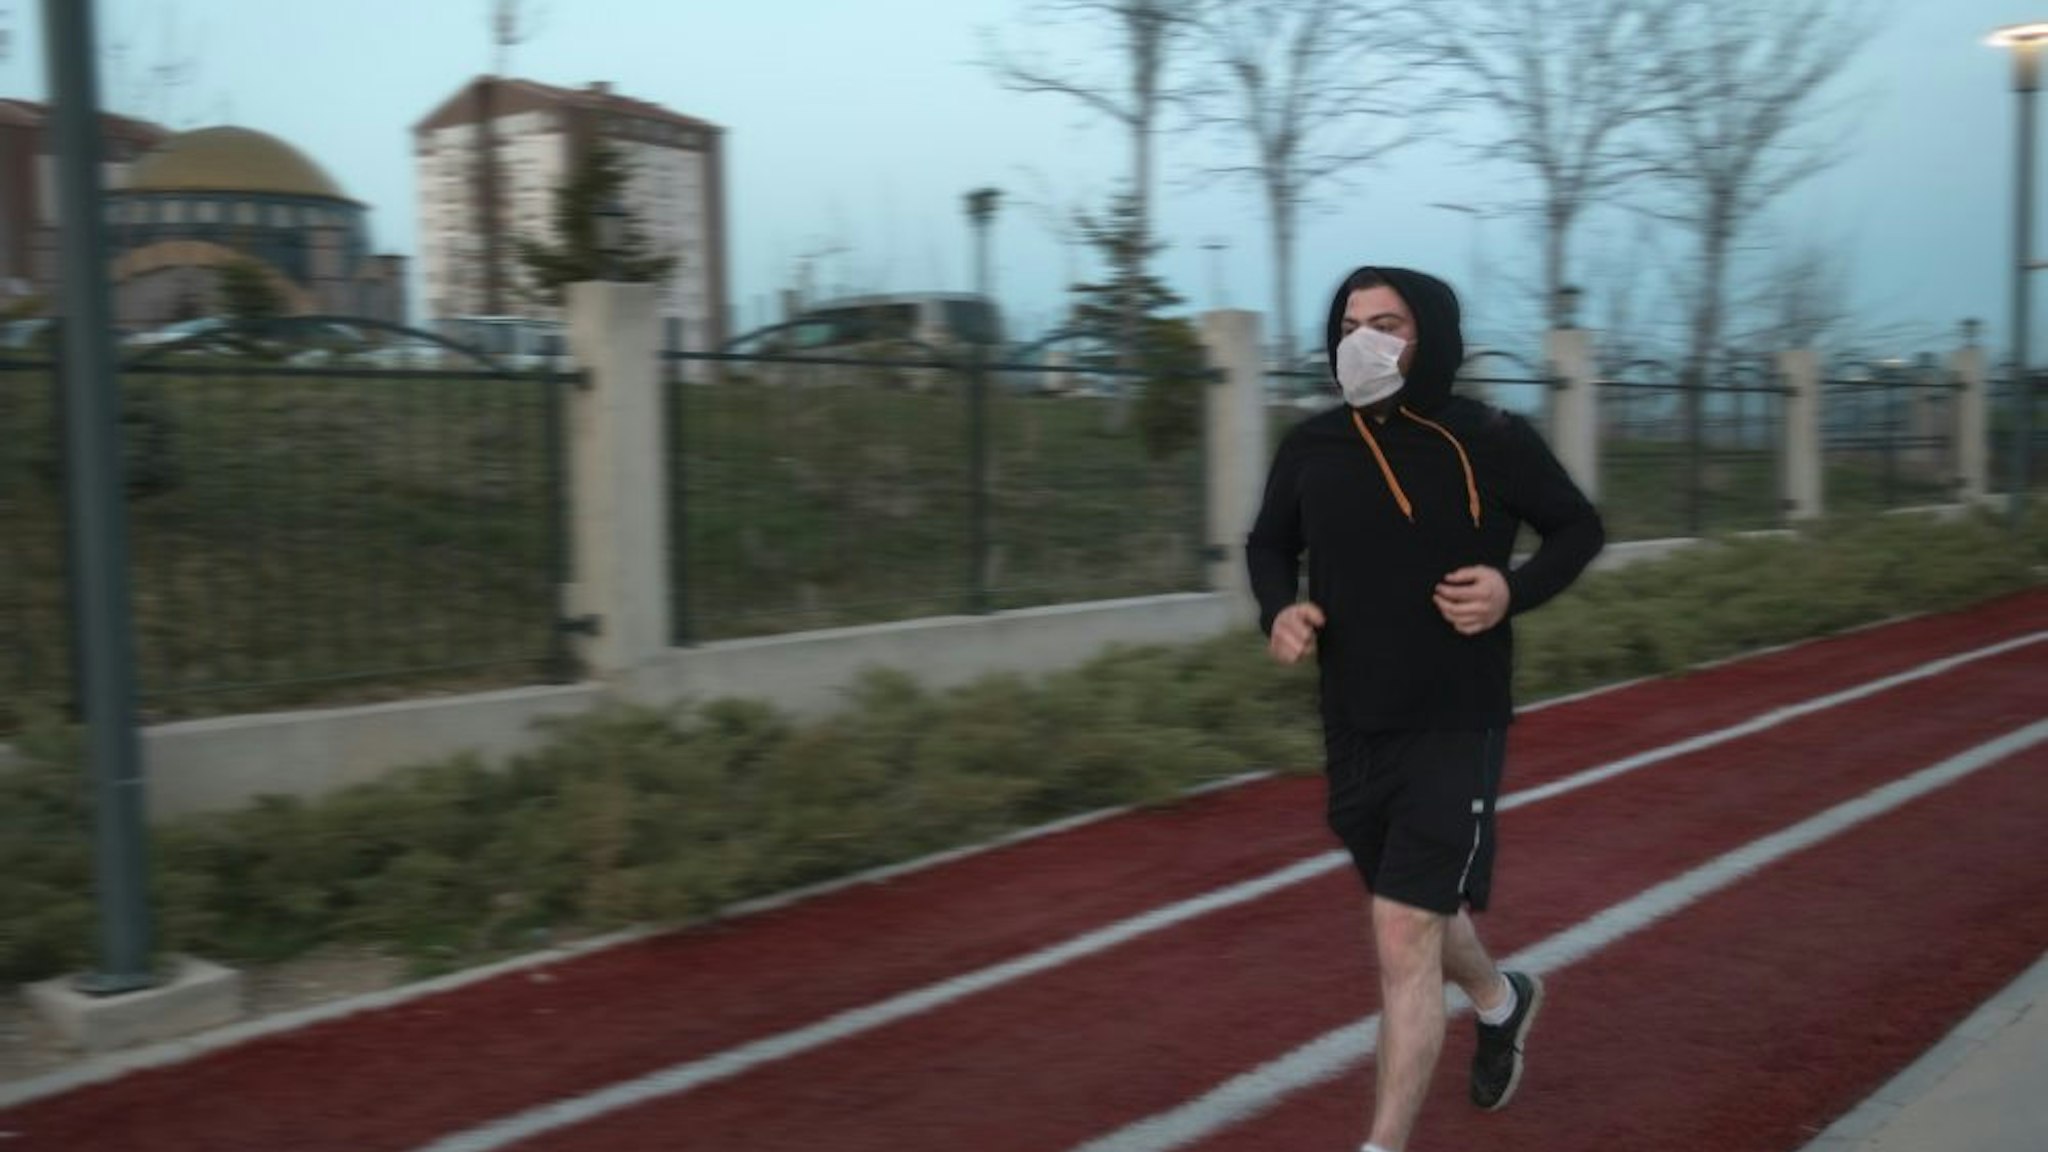 Isolated young man wearing mask and a hoodie running at a parkIsolated young man wearing mask and a hoodie running at a park